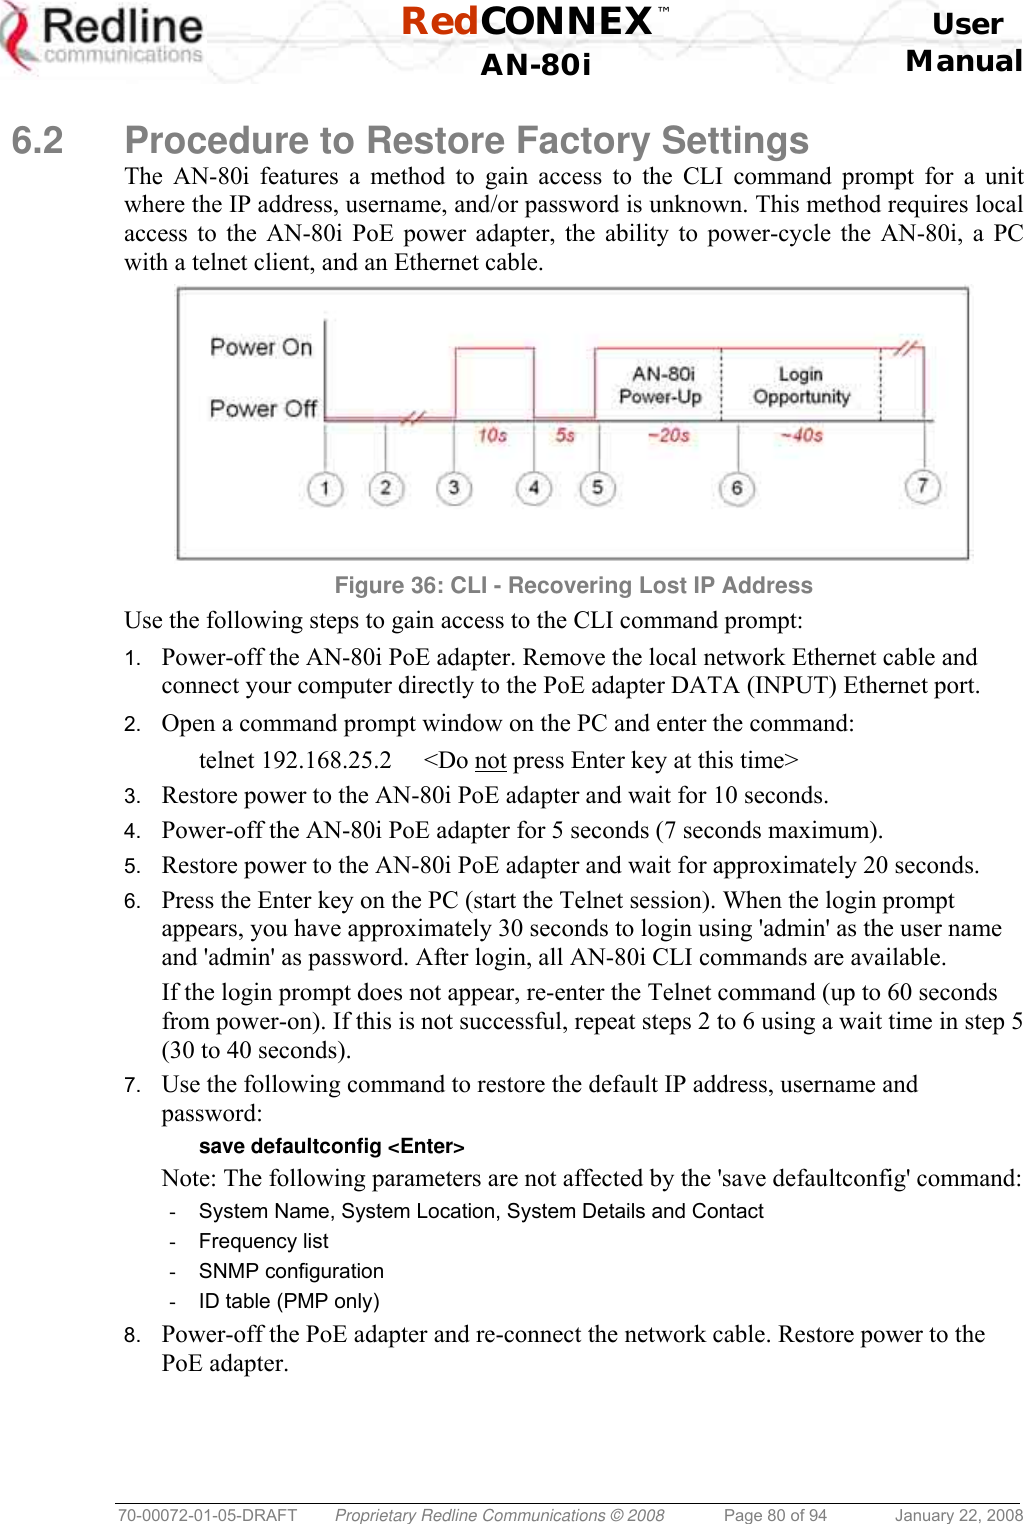  RedCONNEX™    User  AN-80i Manual  70-00072-01-05-DRAFT  Proprietary Redline Communications © 2008  Page 80 of 94  January 22, 2008  6.2  Procedure to Restore Factory Settings The AN-80i features a method to gain access to the CLI command prompt for a unit where the IP address, username, and/or password is unknown. This method requires local access to the AN-80i PoE power adapter, the ability to power-cycle the AN-80i, a PC with a telnet client, and an Ethernet cable.   Figure 36: CLI - Recovering Lost IP Address Use the following steps to gain access to the CLI command prompt: 1.  Power-off the AN-80i PoE adapter. Remove the local network Ethernet cable and connect your computer directly to the PoE adapter DATA (INPUT) Ethernet port. 2.  Open a command prompt window on the PC and enter the command:   telnet 192.168.25.2  &lt;Do not press Enter key at this time&gt; 3.  Restore power to the AN-80i PoE adapter and wait for 10 seconds. 4.  Power-off the AN-80i PoE adapter for 5 seconds (7 seconds maximum). 5.  Restore power to the AN-80i PoE adapter and wait for approximately 20 seconds. 6.  Press the Enter key on the PC (start the Telnet session). When the login prompt appears, you have approximately 30 seconds to login using &apos;admin&apos; as the user name and &apos;admin&apos; as password. After login, all AN-80i CLI commands are available. If the login prompt does not appear, re-enter the Telnet command (up to 60 seconds from power-on). If this is not successful, repeat steps 2 to 6 using a wait time in step 5 (30 to 40 seconds). 7.  Use the following command to restore the default IP address, username and password:   save defaultconfig &lt;Enter&gt; Note: The following parameters are not affected by the &apos;save defaultconfig&apos; command:  -  System Name, System Location, System Details and Contact -  Frequency list -  SNMP configuration -  ID table (PMP only) 8.  Power-off the PoE adapter and re-connect the network cable. Restore power to the PoE adapter.  